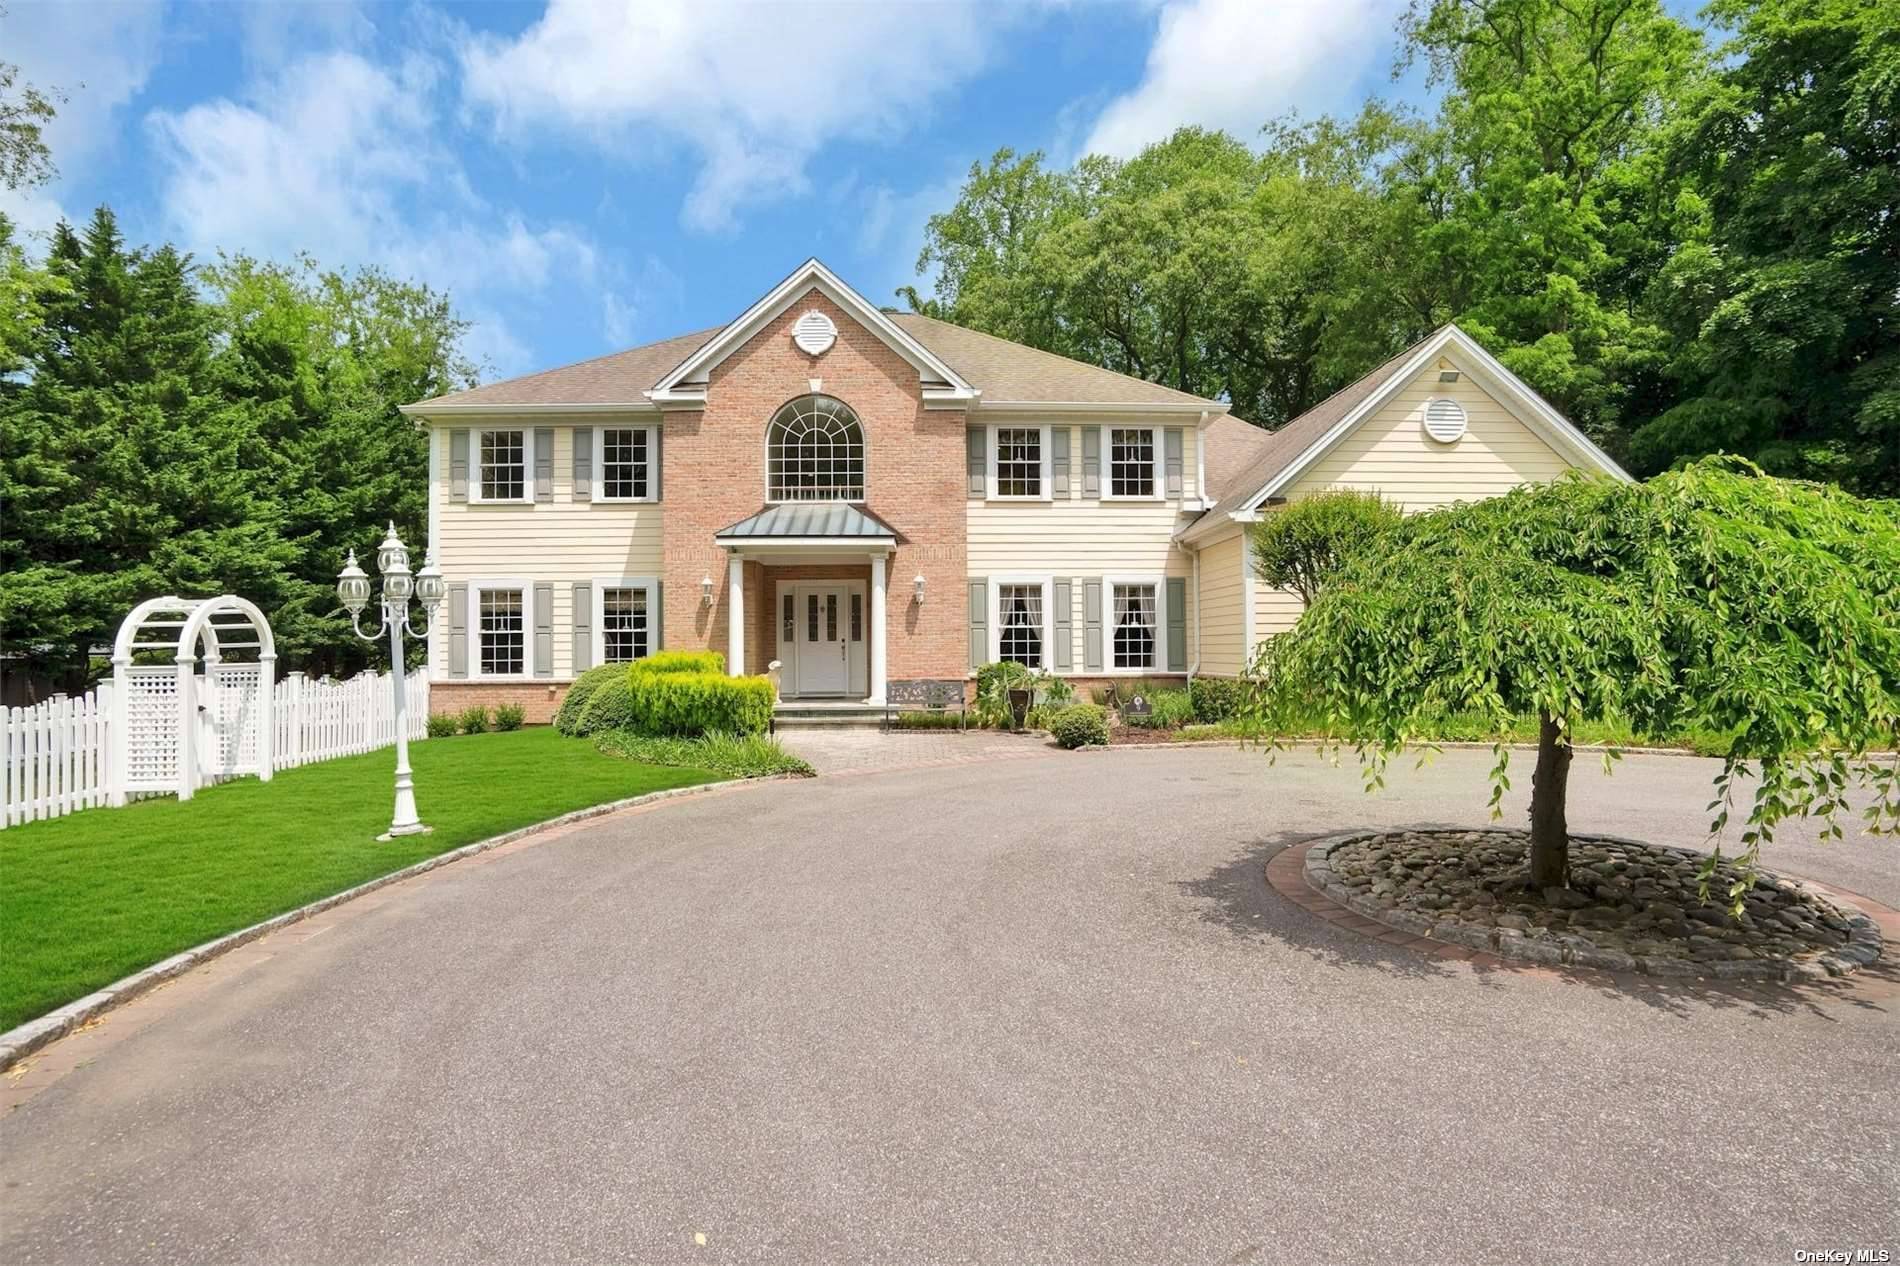 4 Splendid Acres ! RUNNING BROOK is enchanting at every turn, from its circular drive, picket fencing, past its pristine five bedroom, four and a half bath, colonial manor, on ...